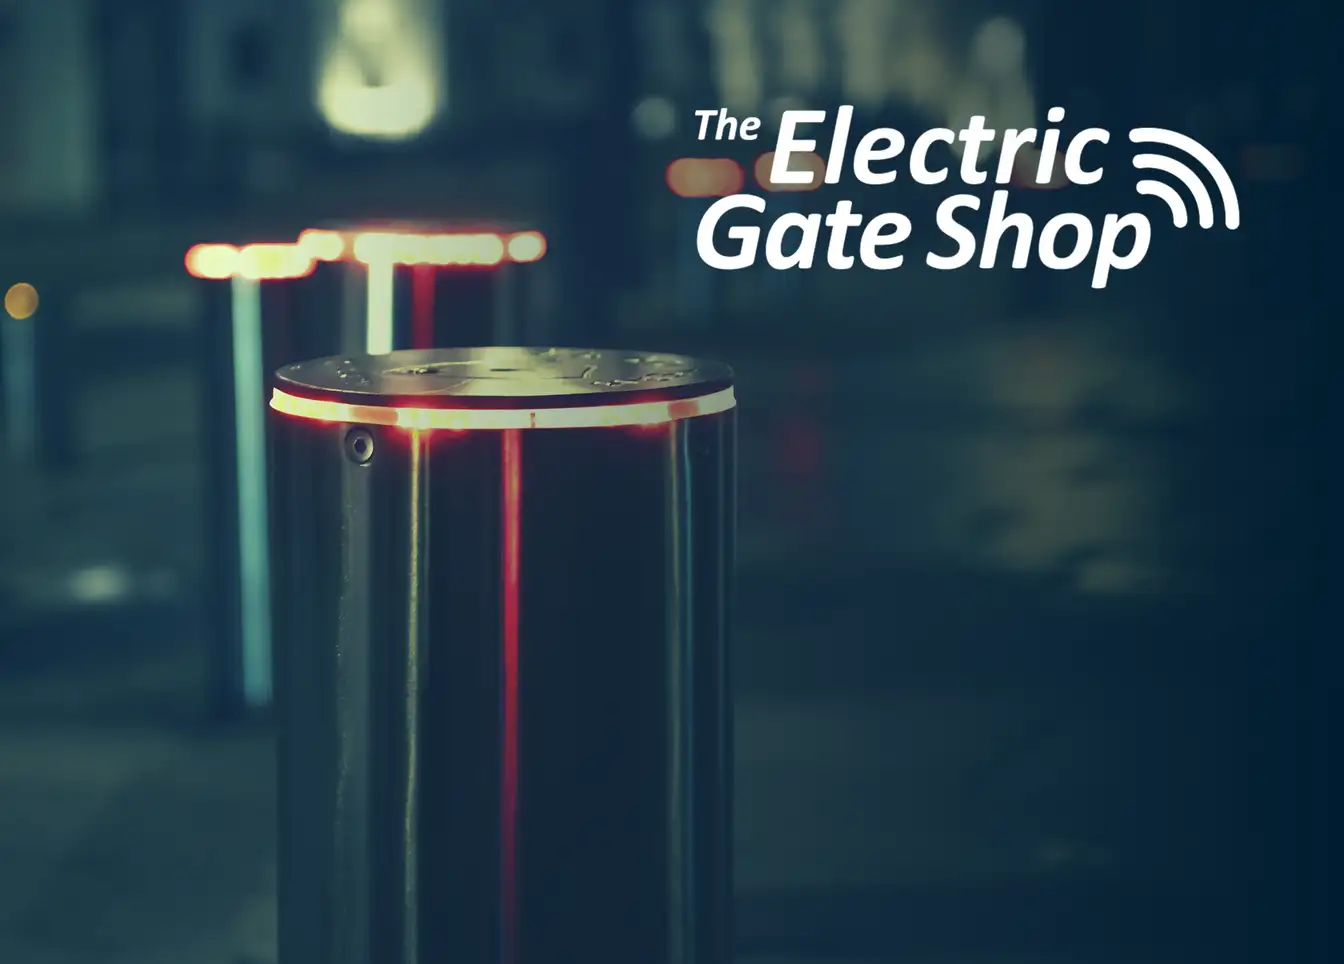 The Electric Gate Shop Image